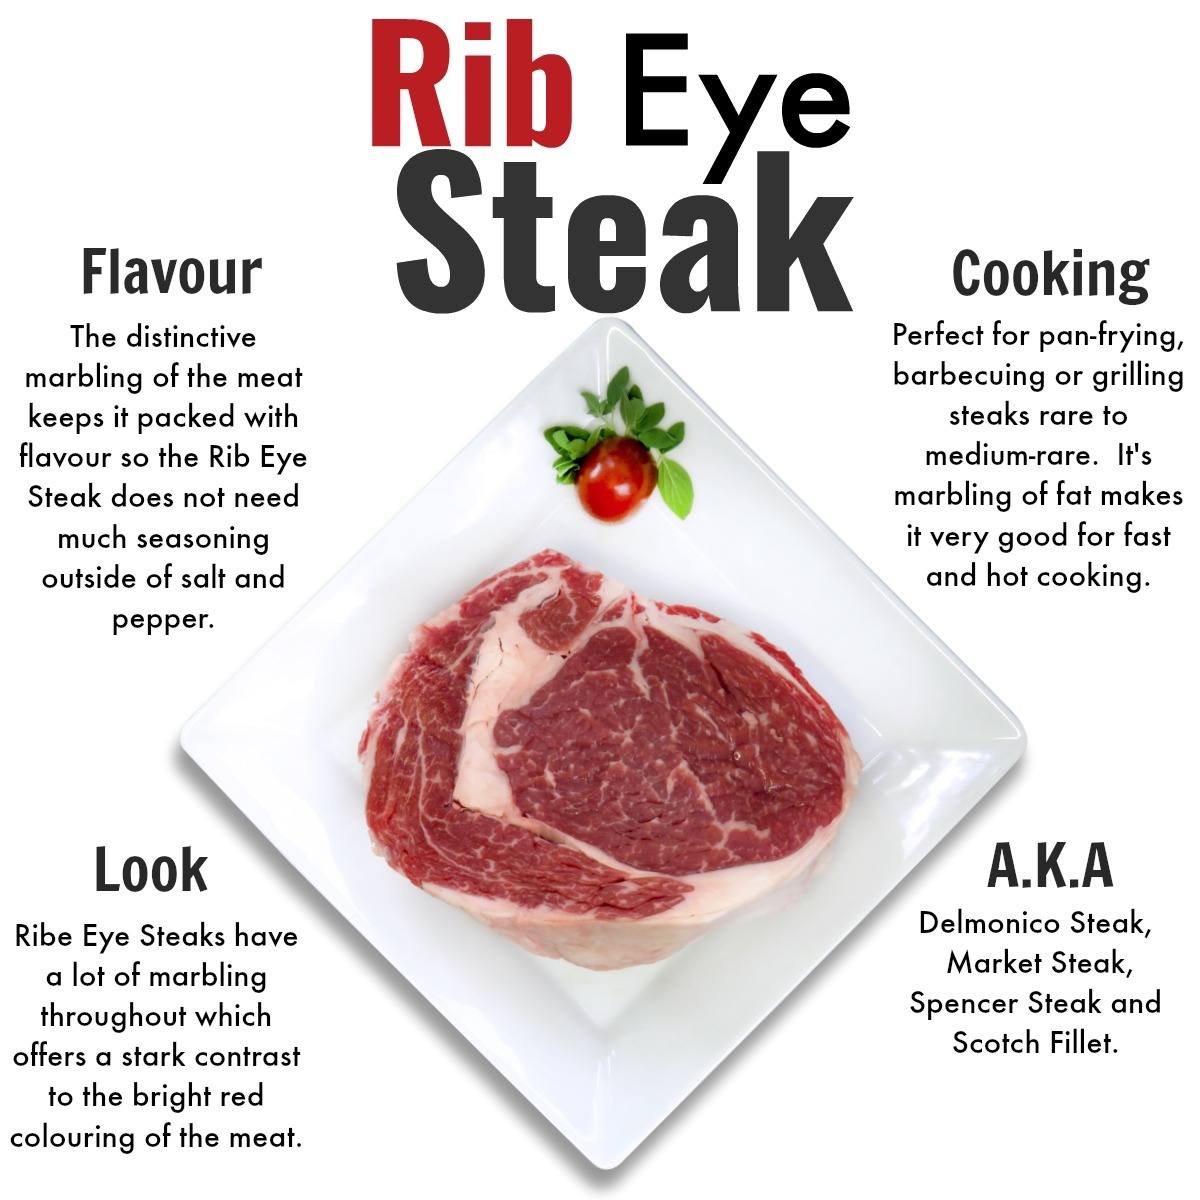 Affordable grass-fed beef delivery near me, steaks, ground beef and more - Rib Eye Steak 2